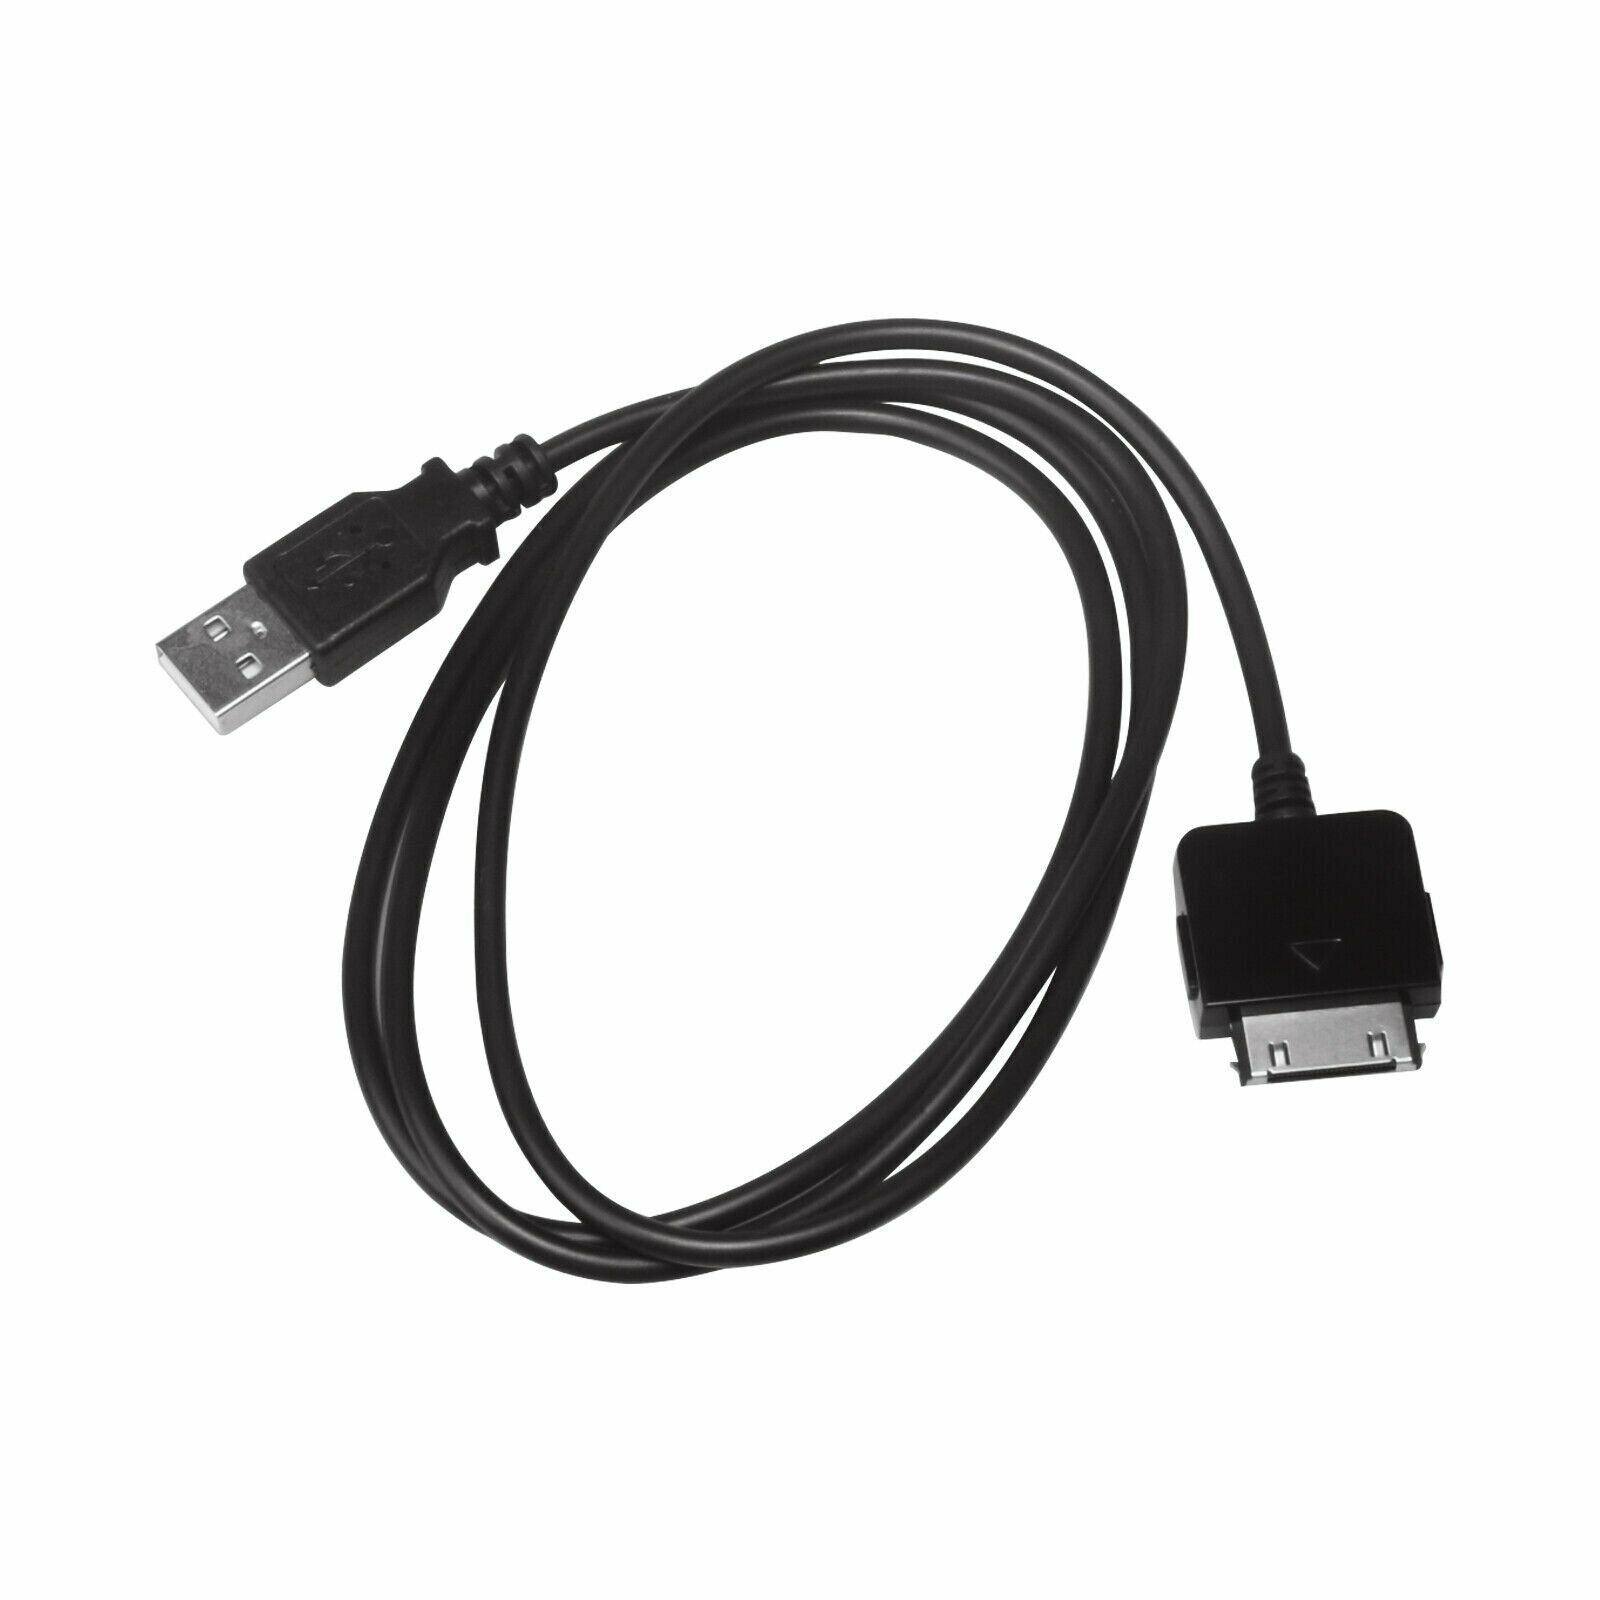 For Microsoft Zune HD MP3 Player USB Data Sync Charger Cable Cord